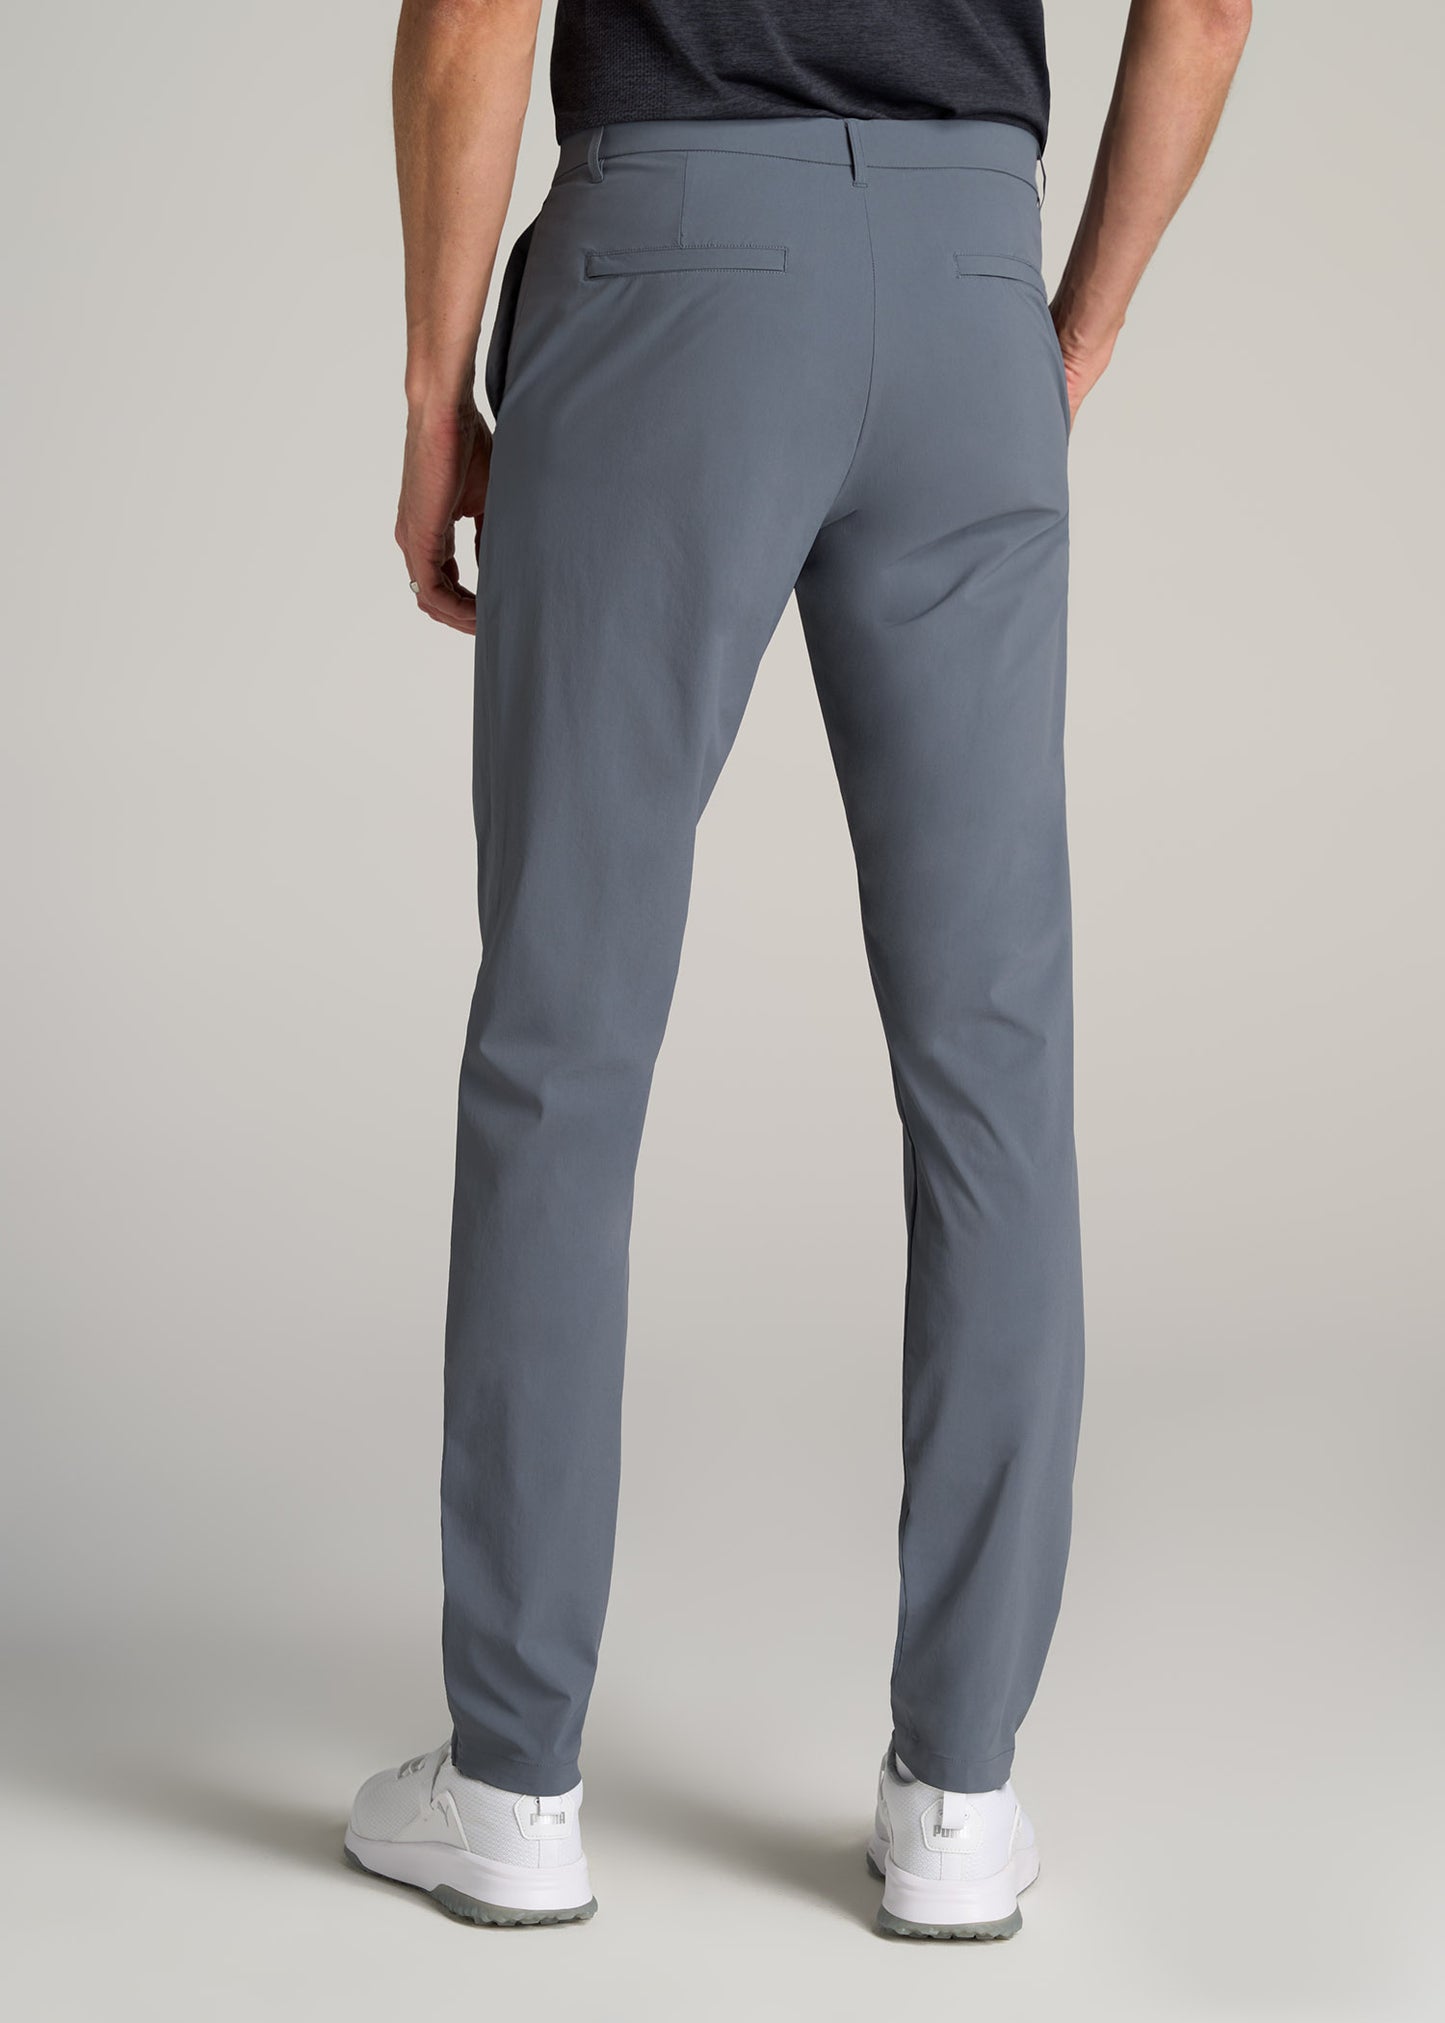 Men's Tall Trousers | Casual, Formal & Workwear Trousers | Next